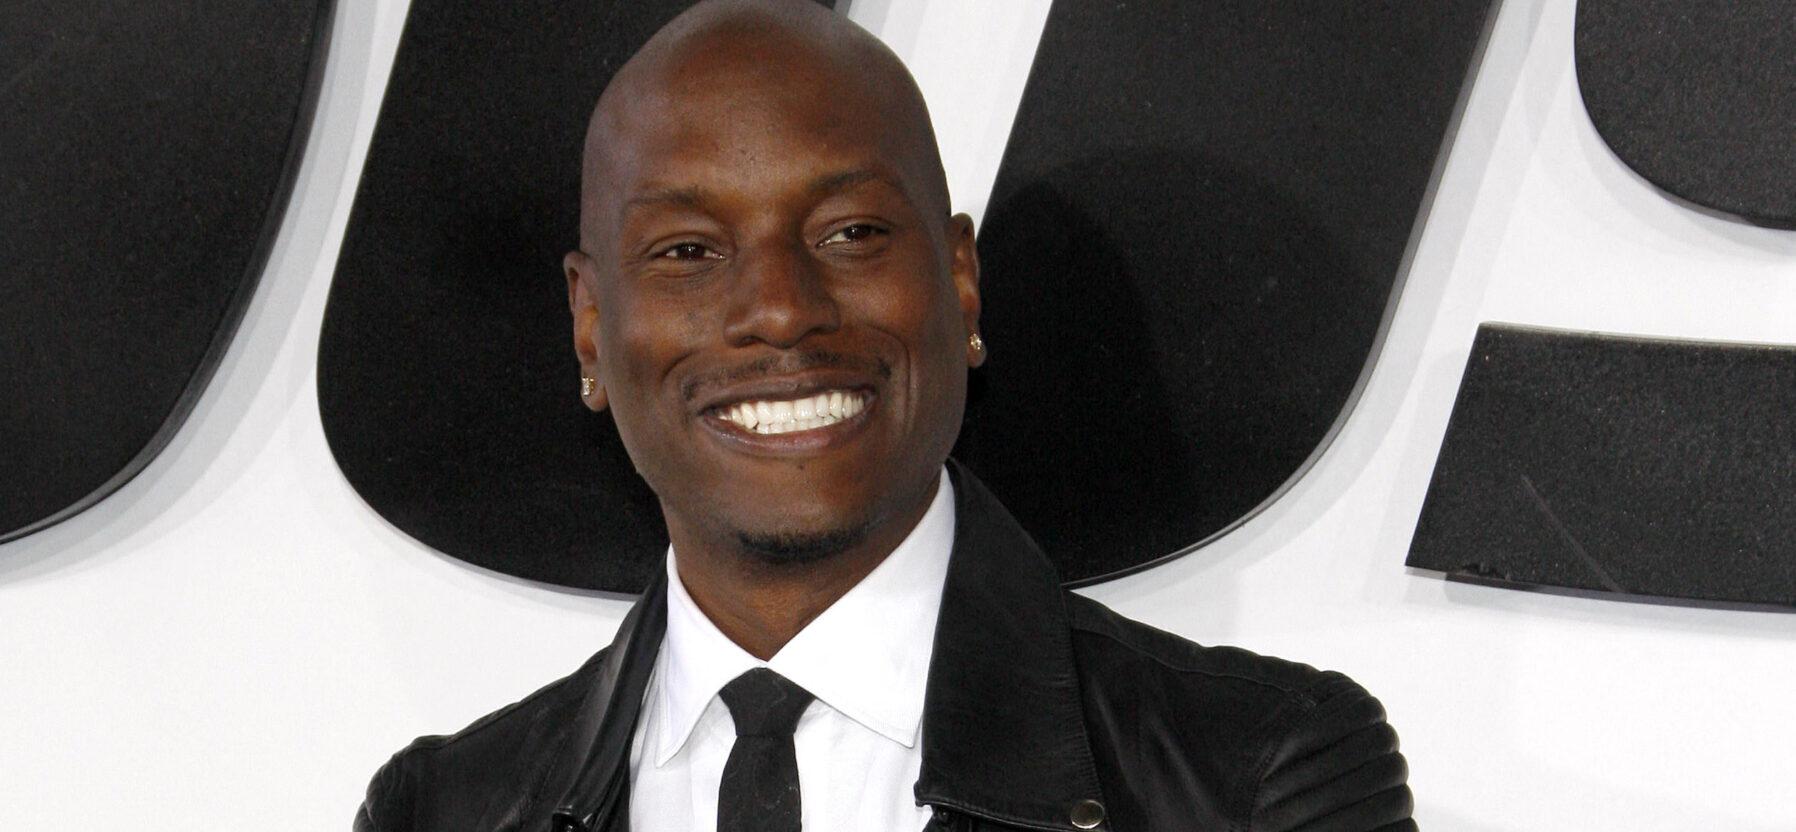 Tyrese Gibson Sued For $10 Million Over 'Breakfast Club' Interview